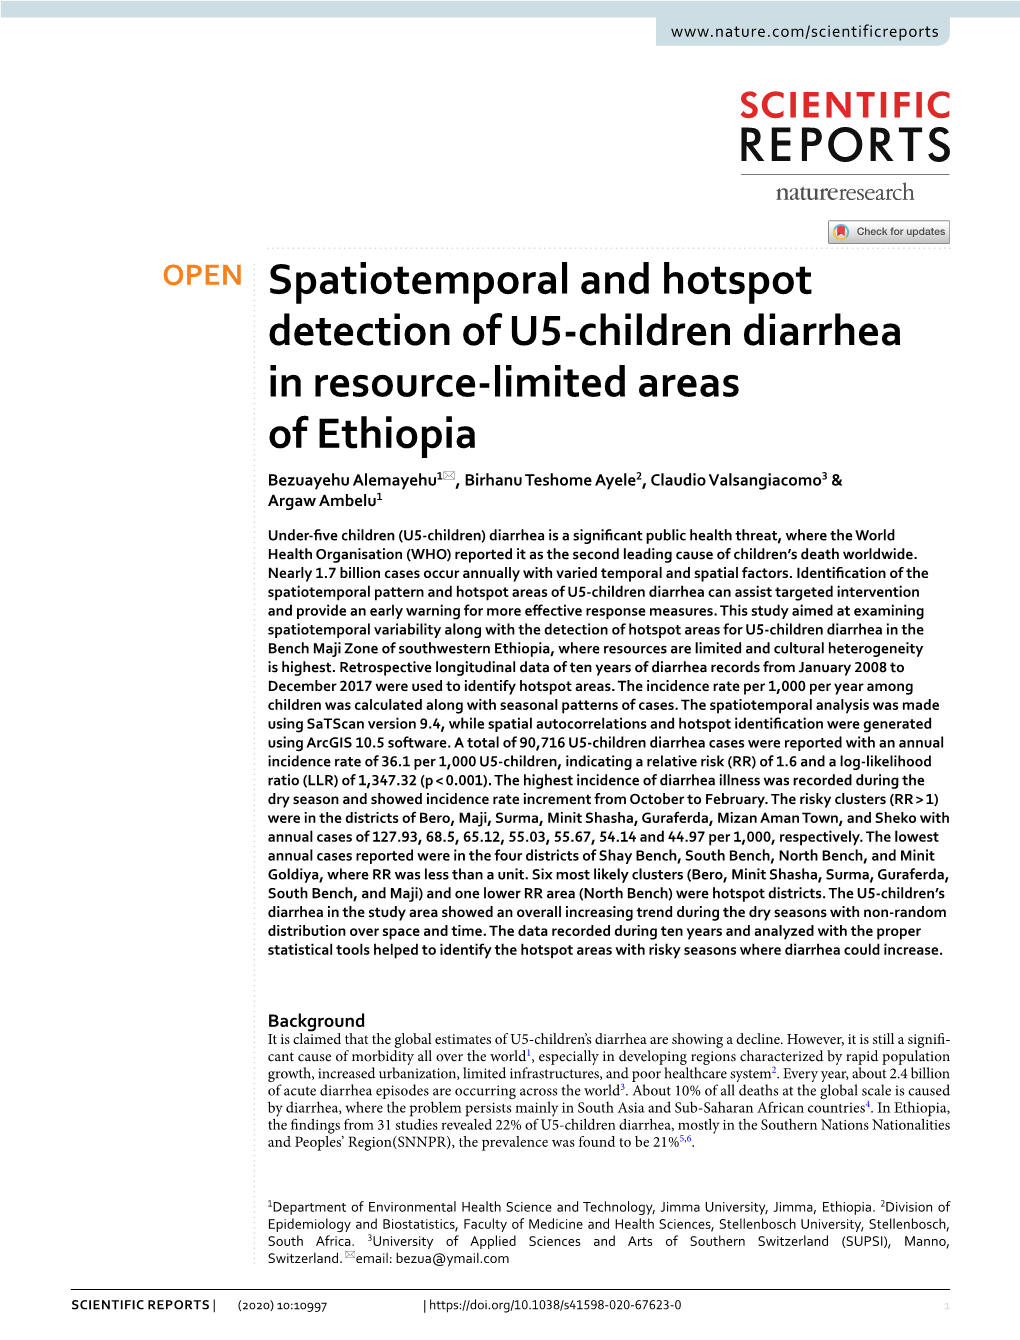 Spatiotemporal and Hotspot Detection of U5-Children Diarrhea In